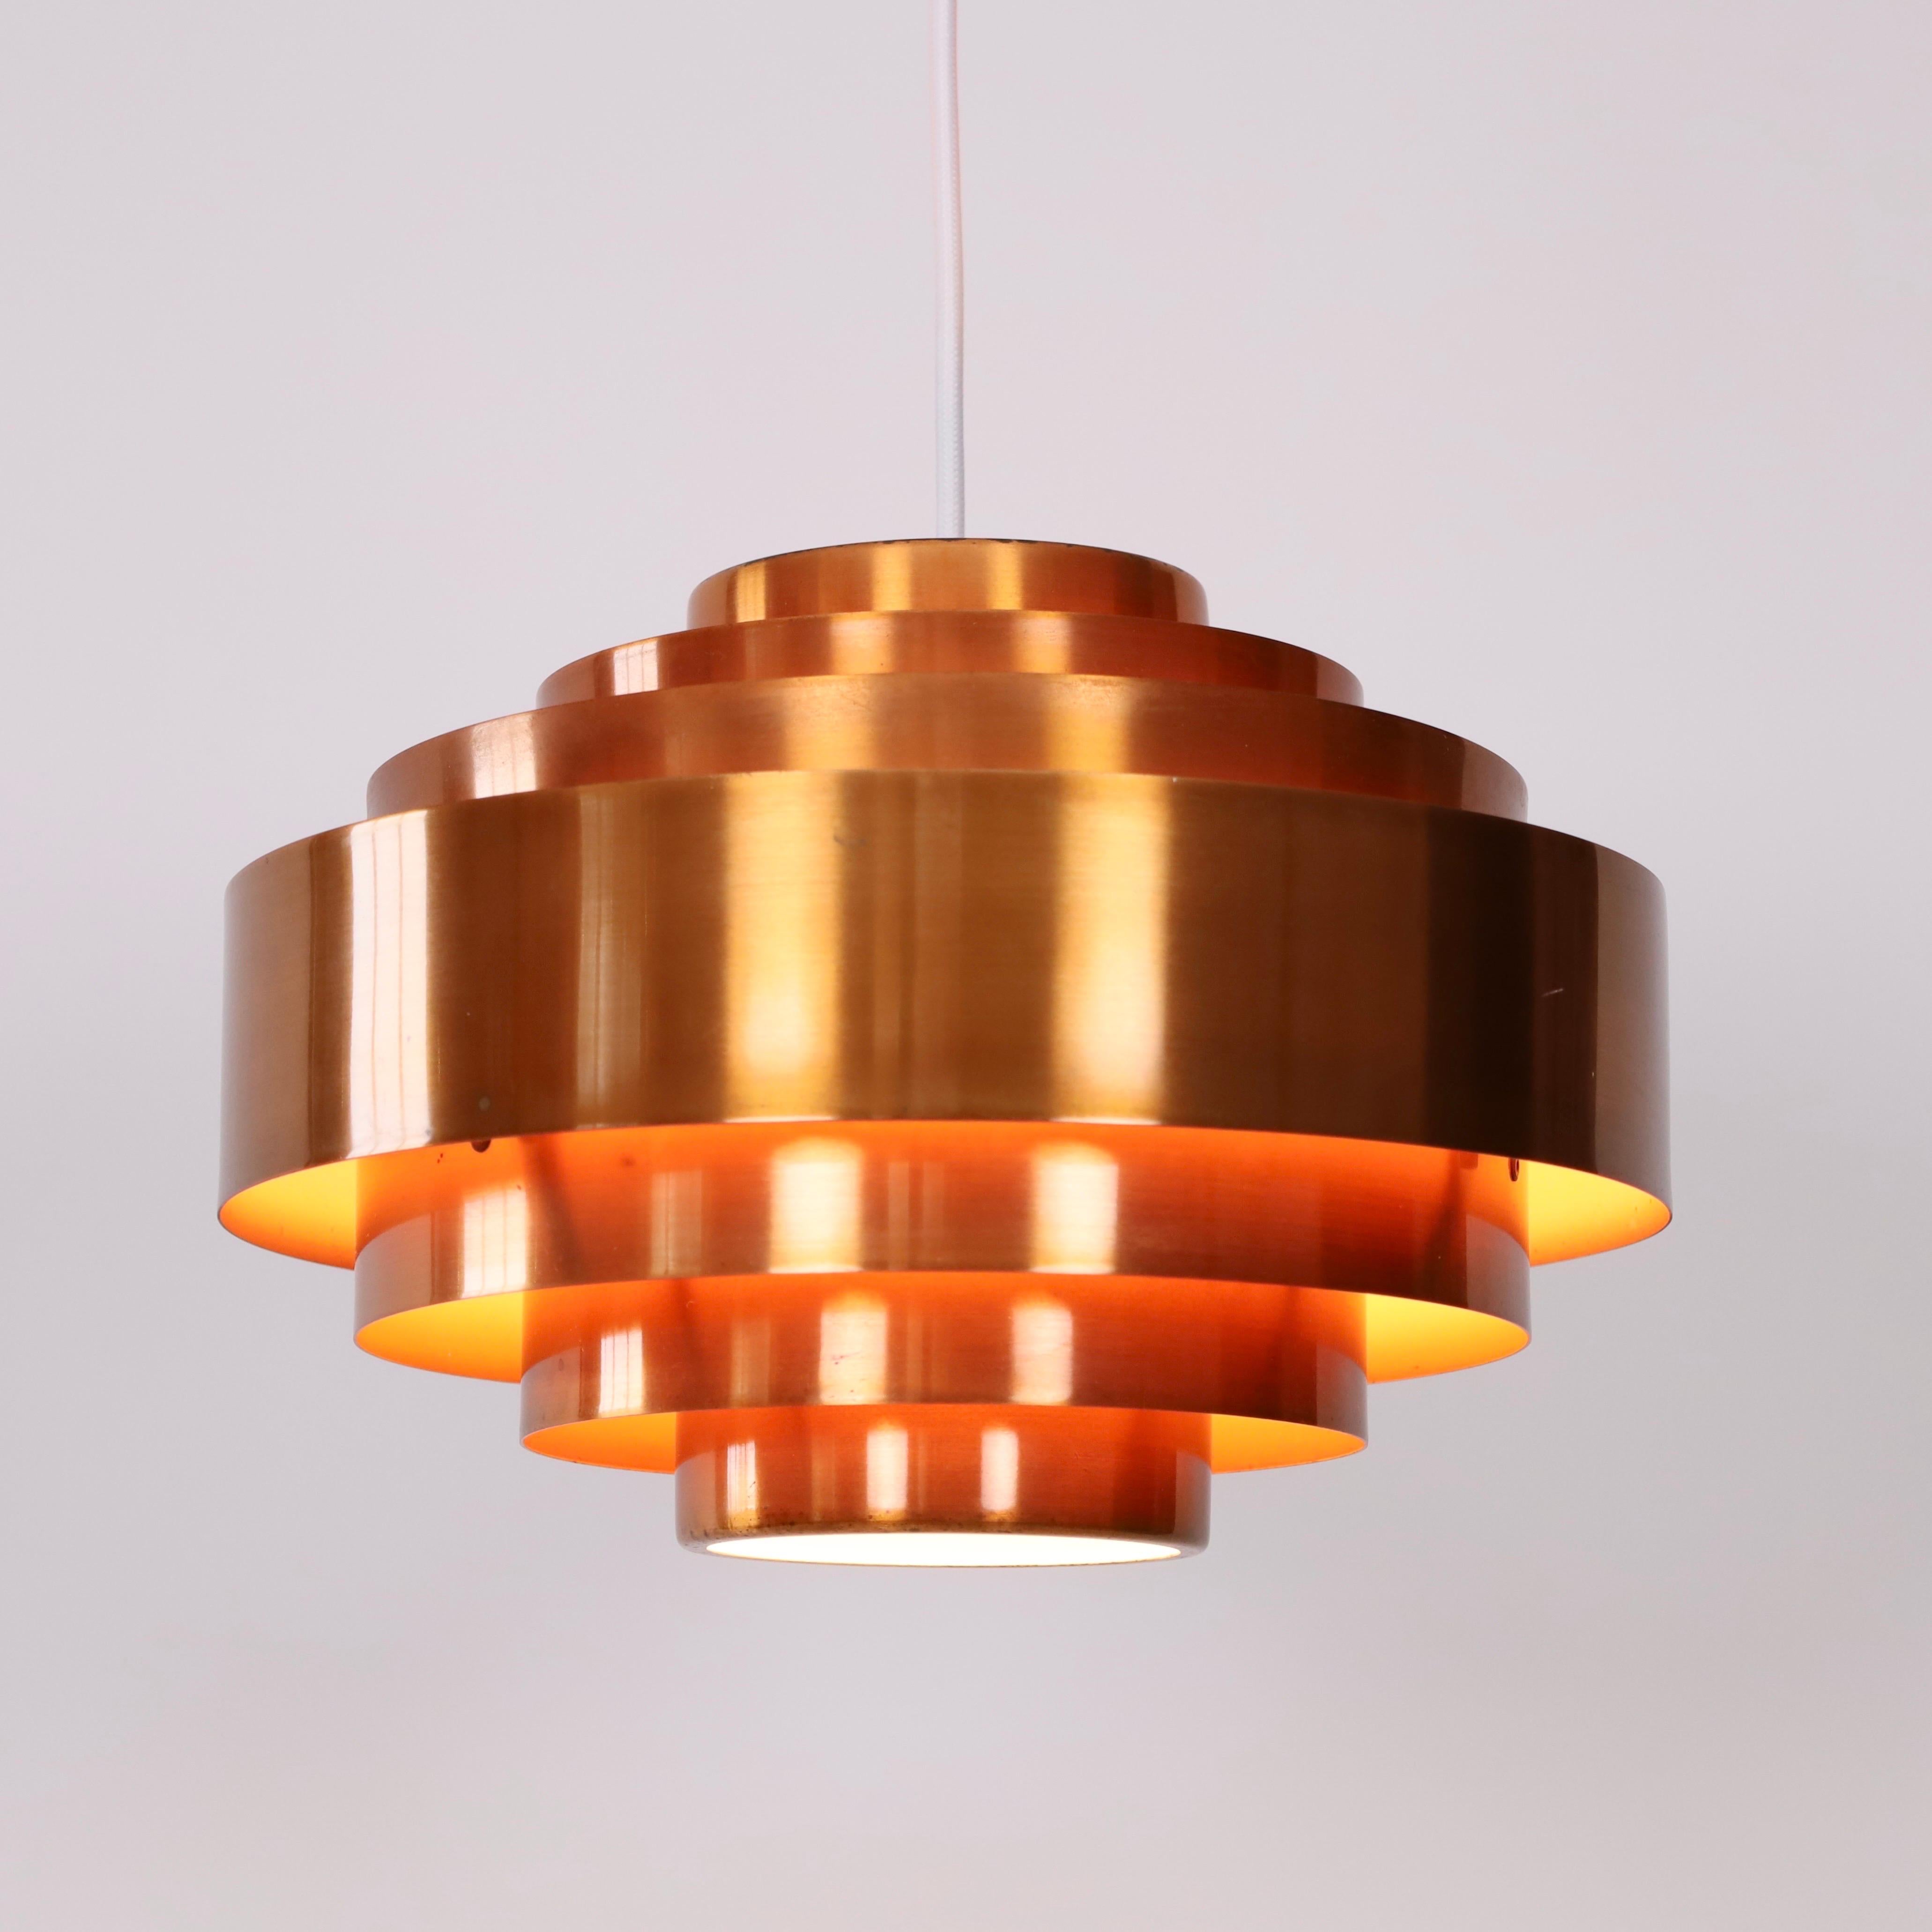 A Danish Classic by Jo Hammerborg. A warm light for a beautiful home.  

* A copper ceiling pendant
* Designer: Jo Hammerborg
* Model: Ultra
* Manufacturer: Fog & Mørup
* Year: 1963
* Condition: Good vintage condition. Some marks and tear on the